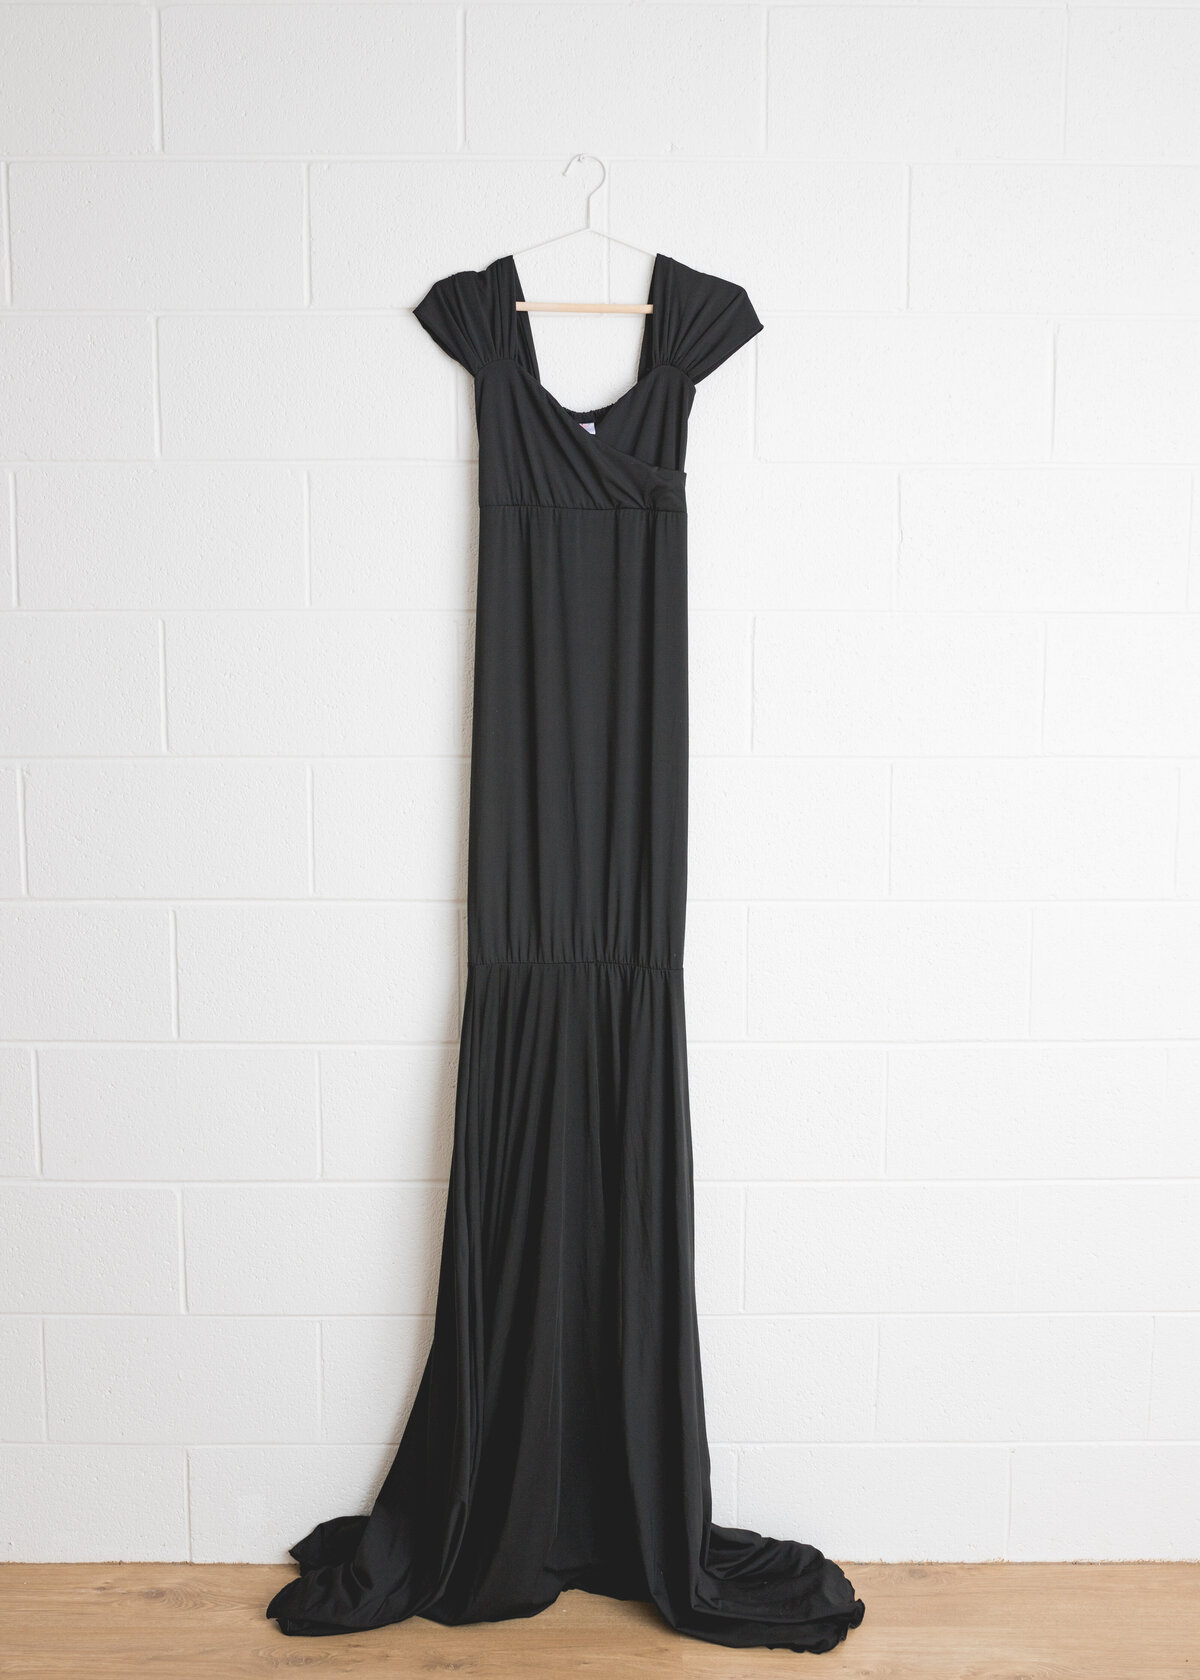 Black Chicaboo Maternity gown for sizes 6-18, available in Lauren Vanier Photography's Client Wardrobe